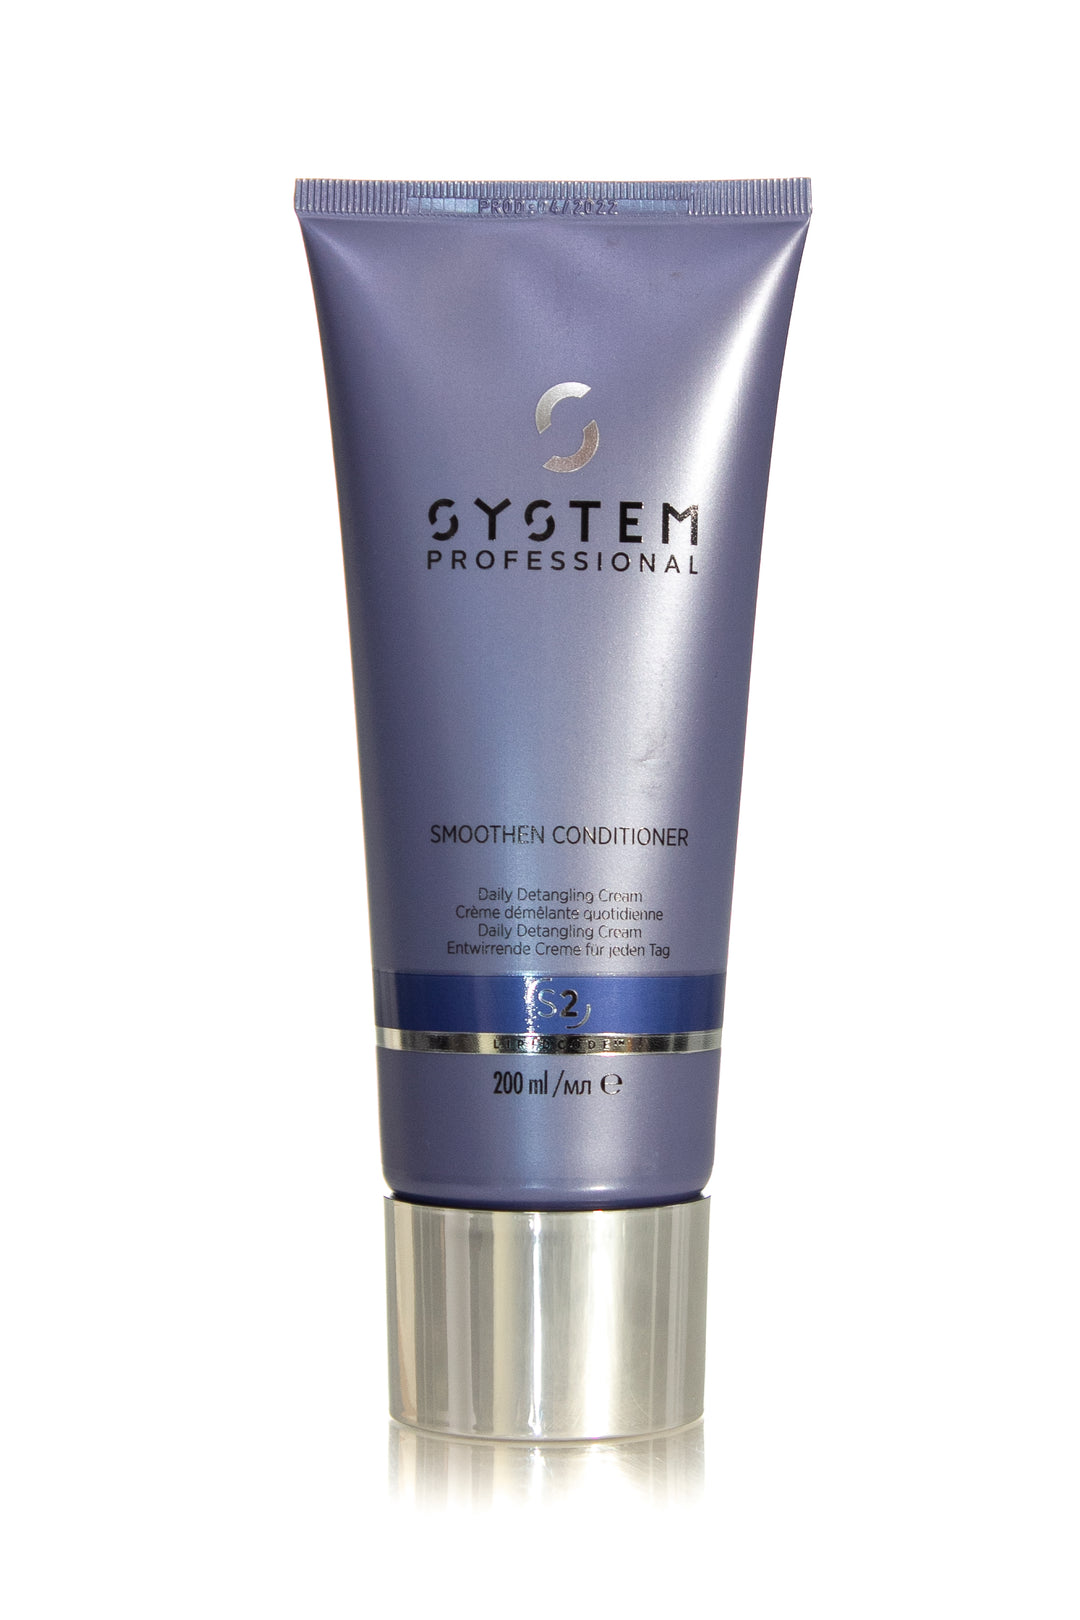 SYSTEM PROFESSIONAL Smoothen Conditioner  | 200ml